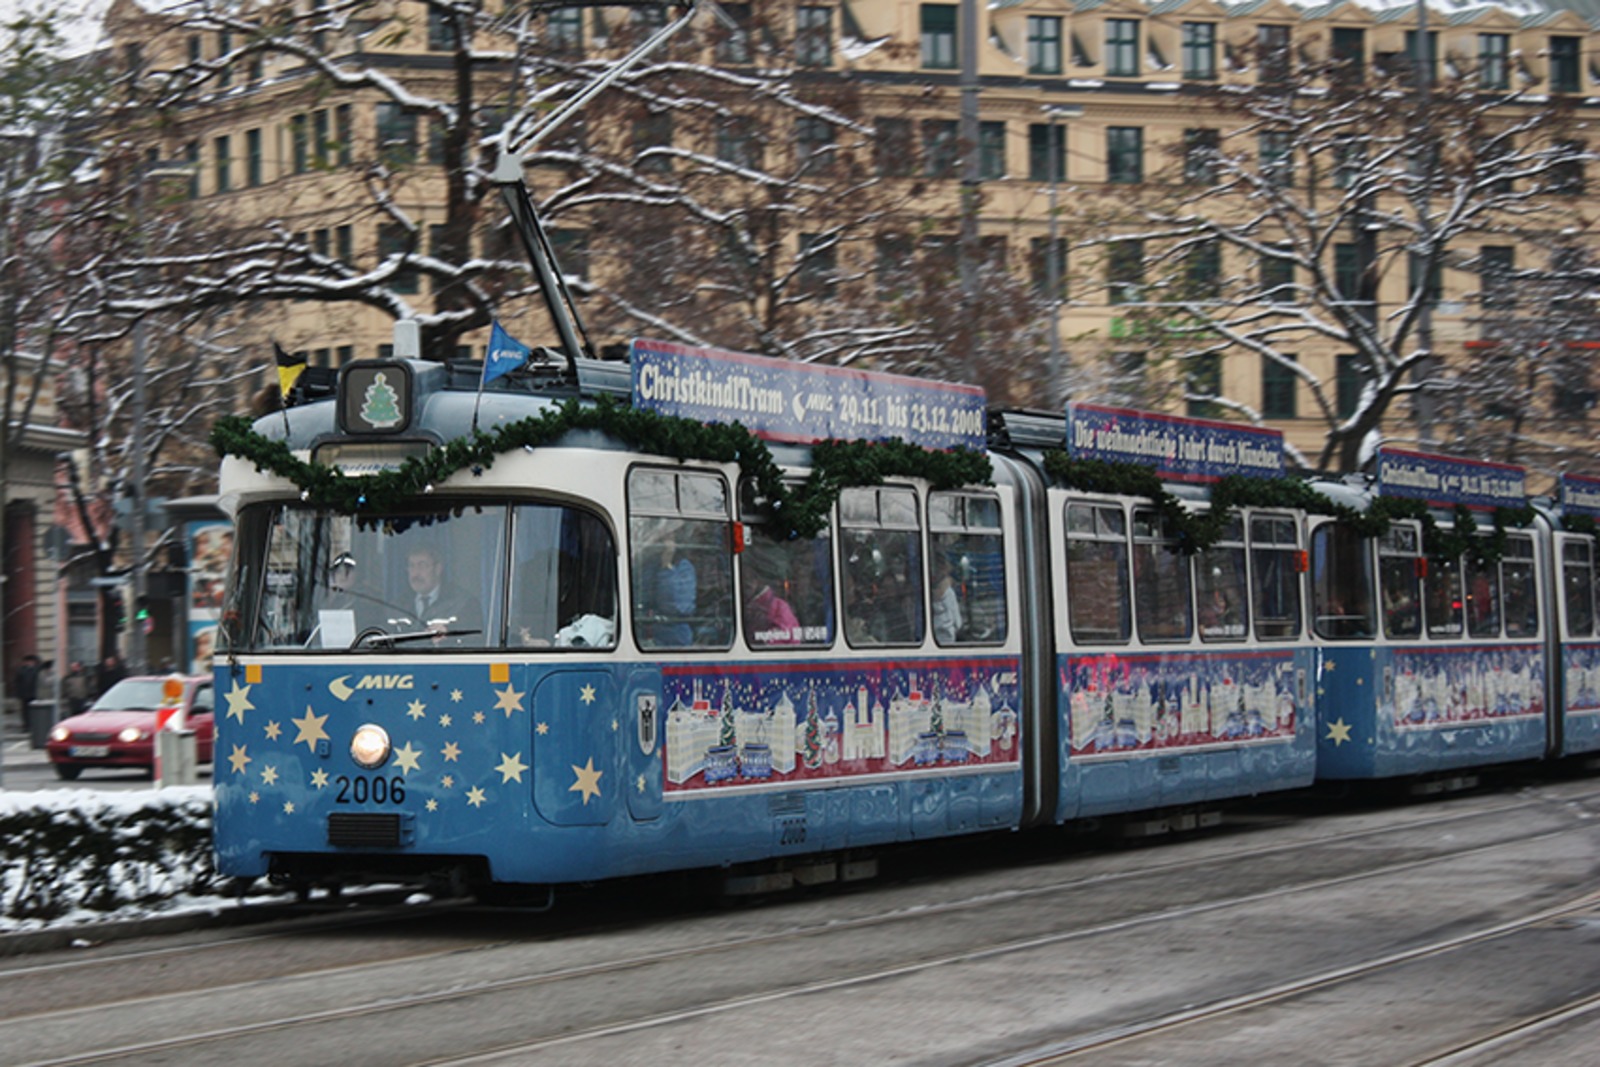 Munich 1Hour Tour in the Christmas Tram Guest in a city